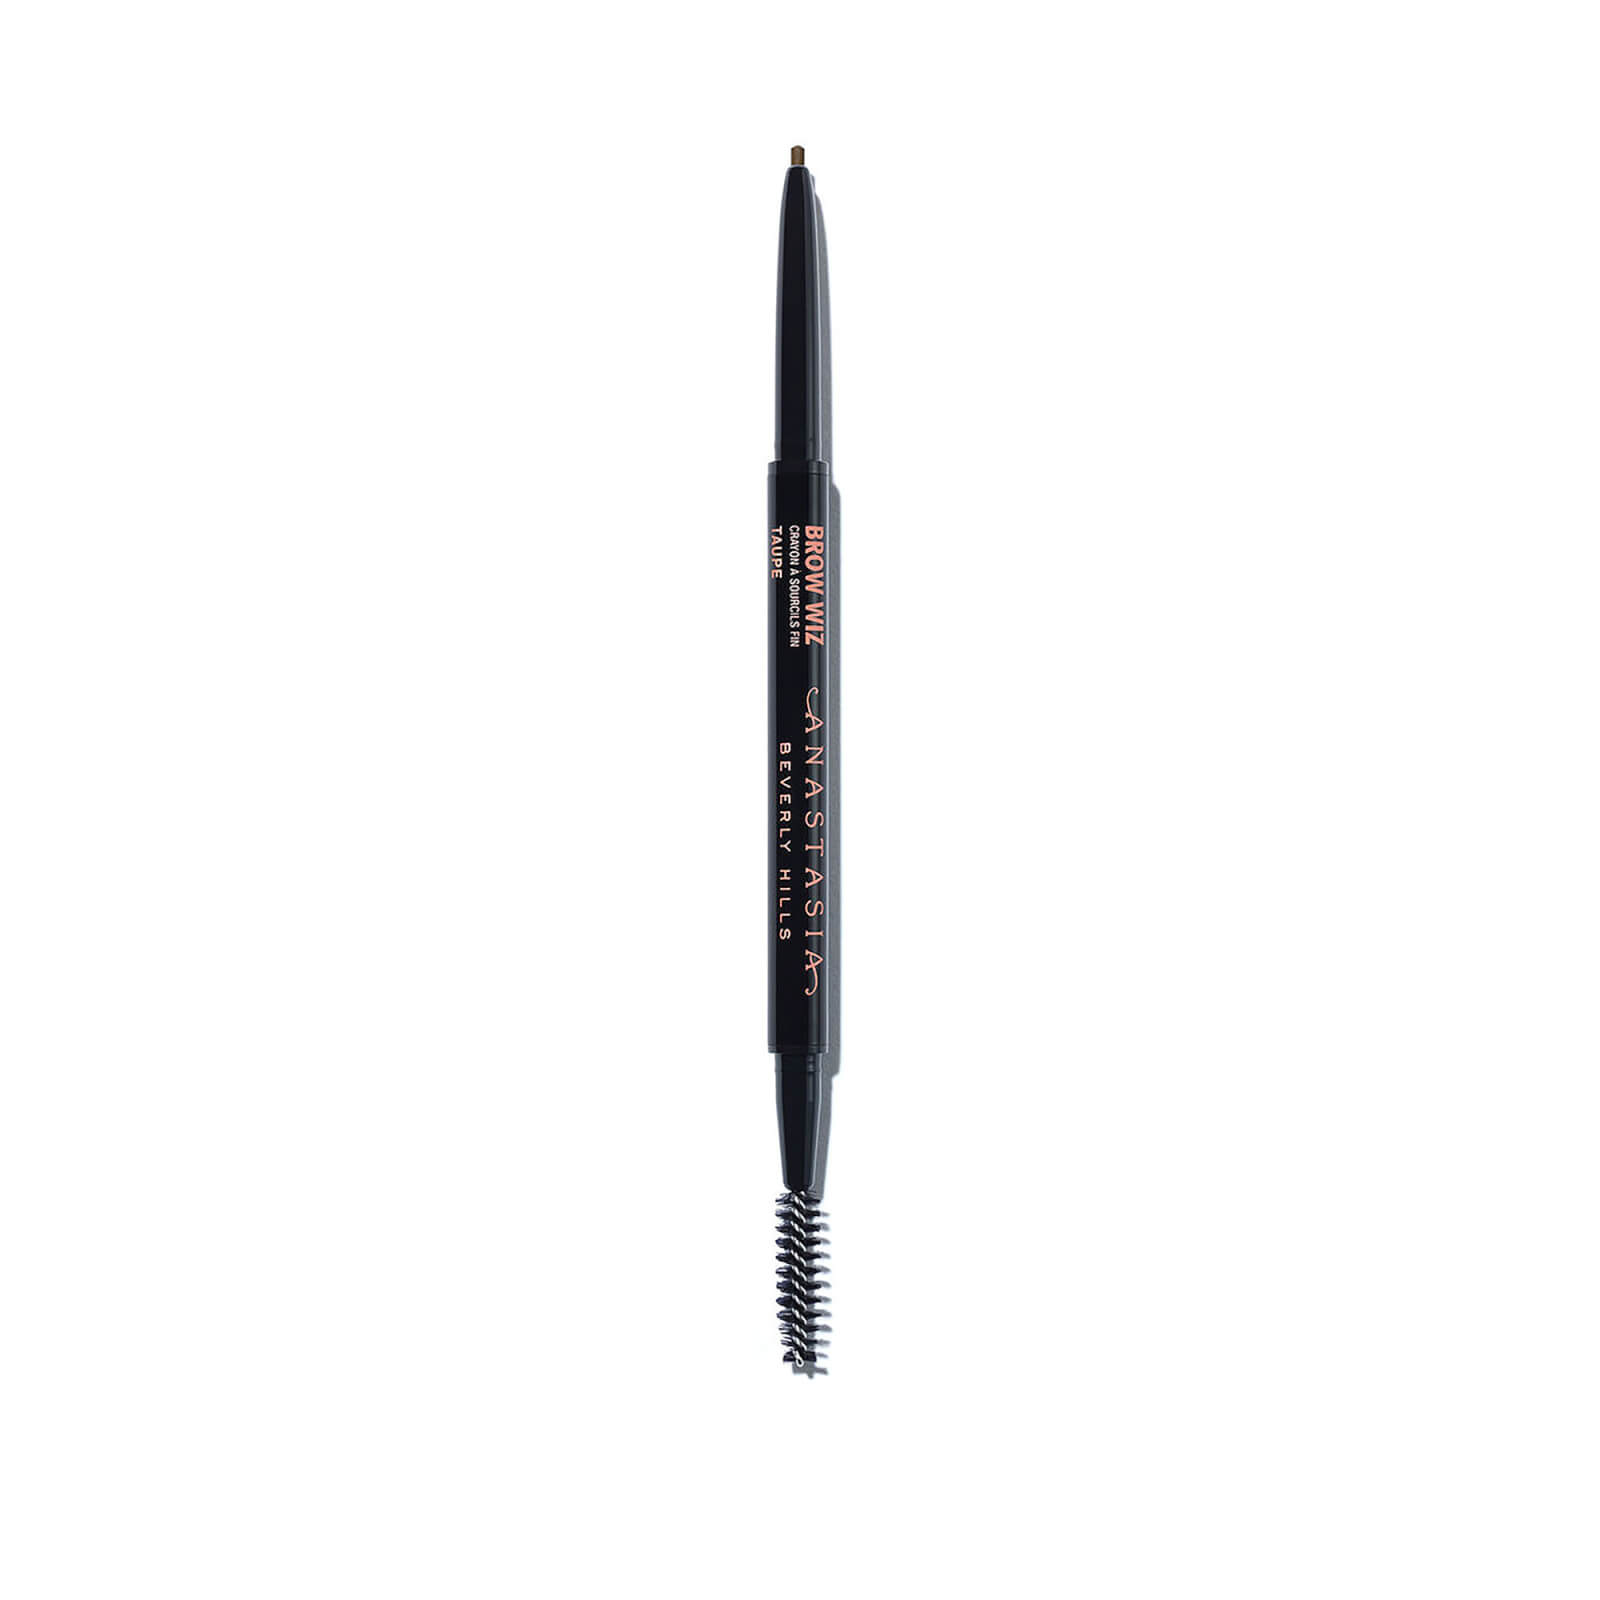 Anastasia Beverly Hills Brow Wiz 0.08g (Various Shades) - Taupe